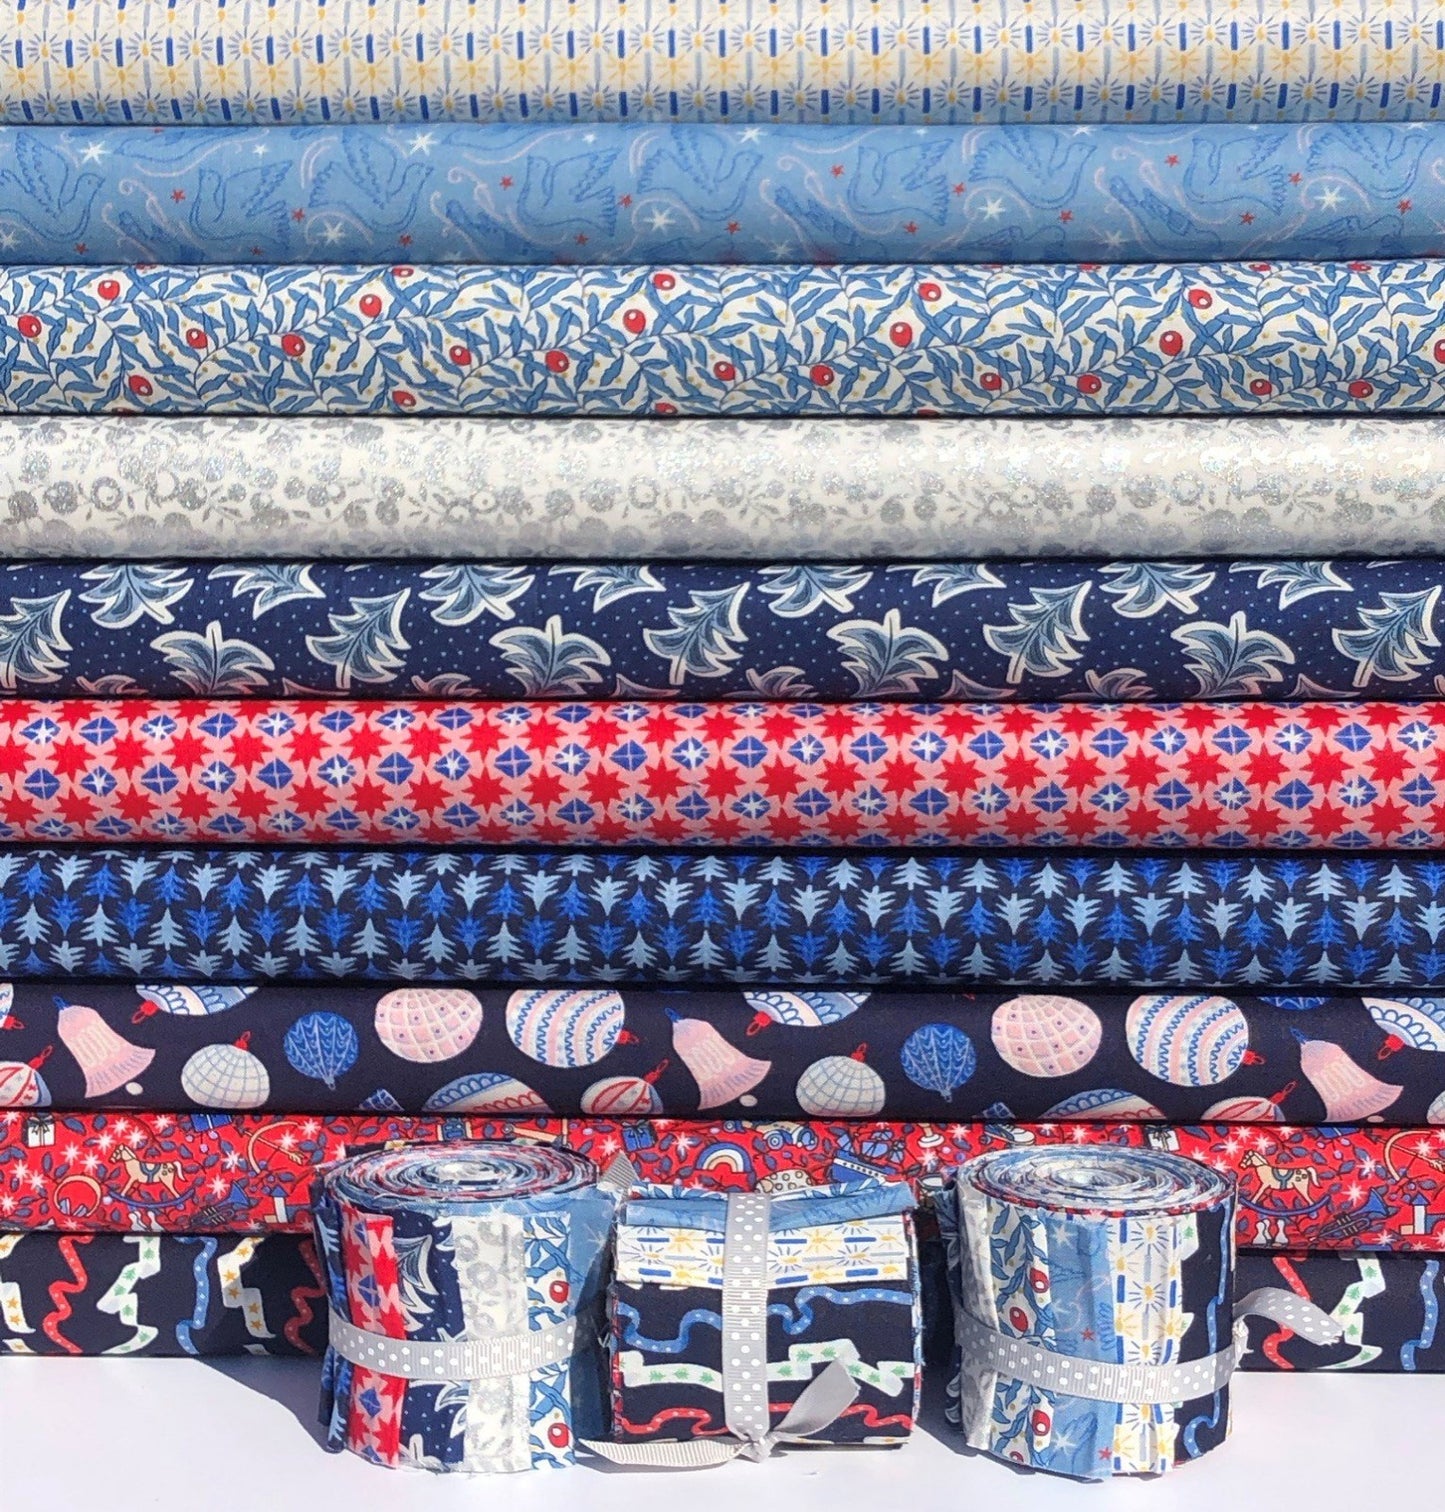 10 2.5inch strips of Liberty quilting cotton jelly roll - Merry and Bright blue and red